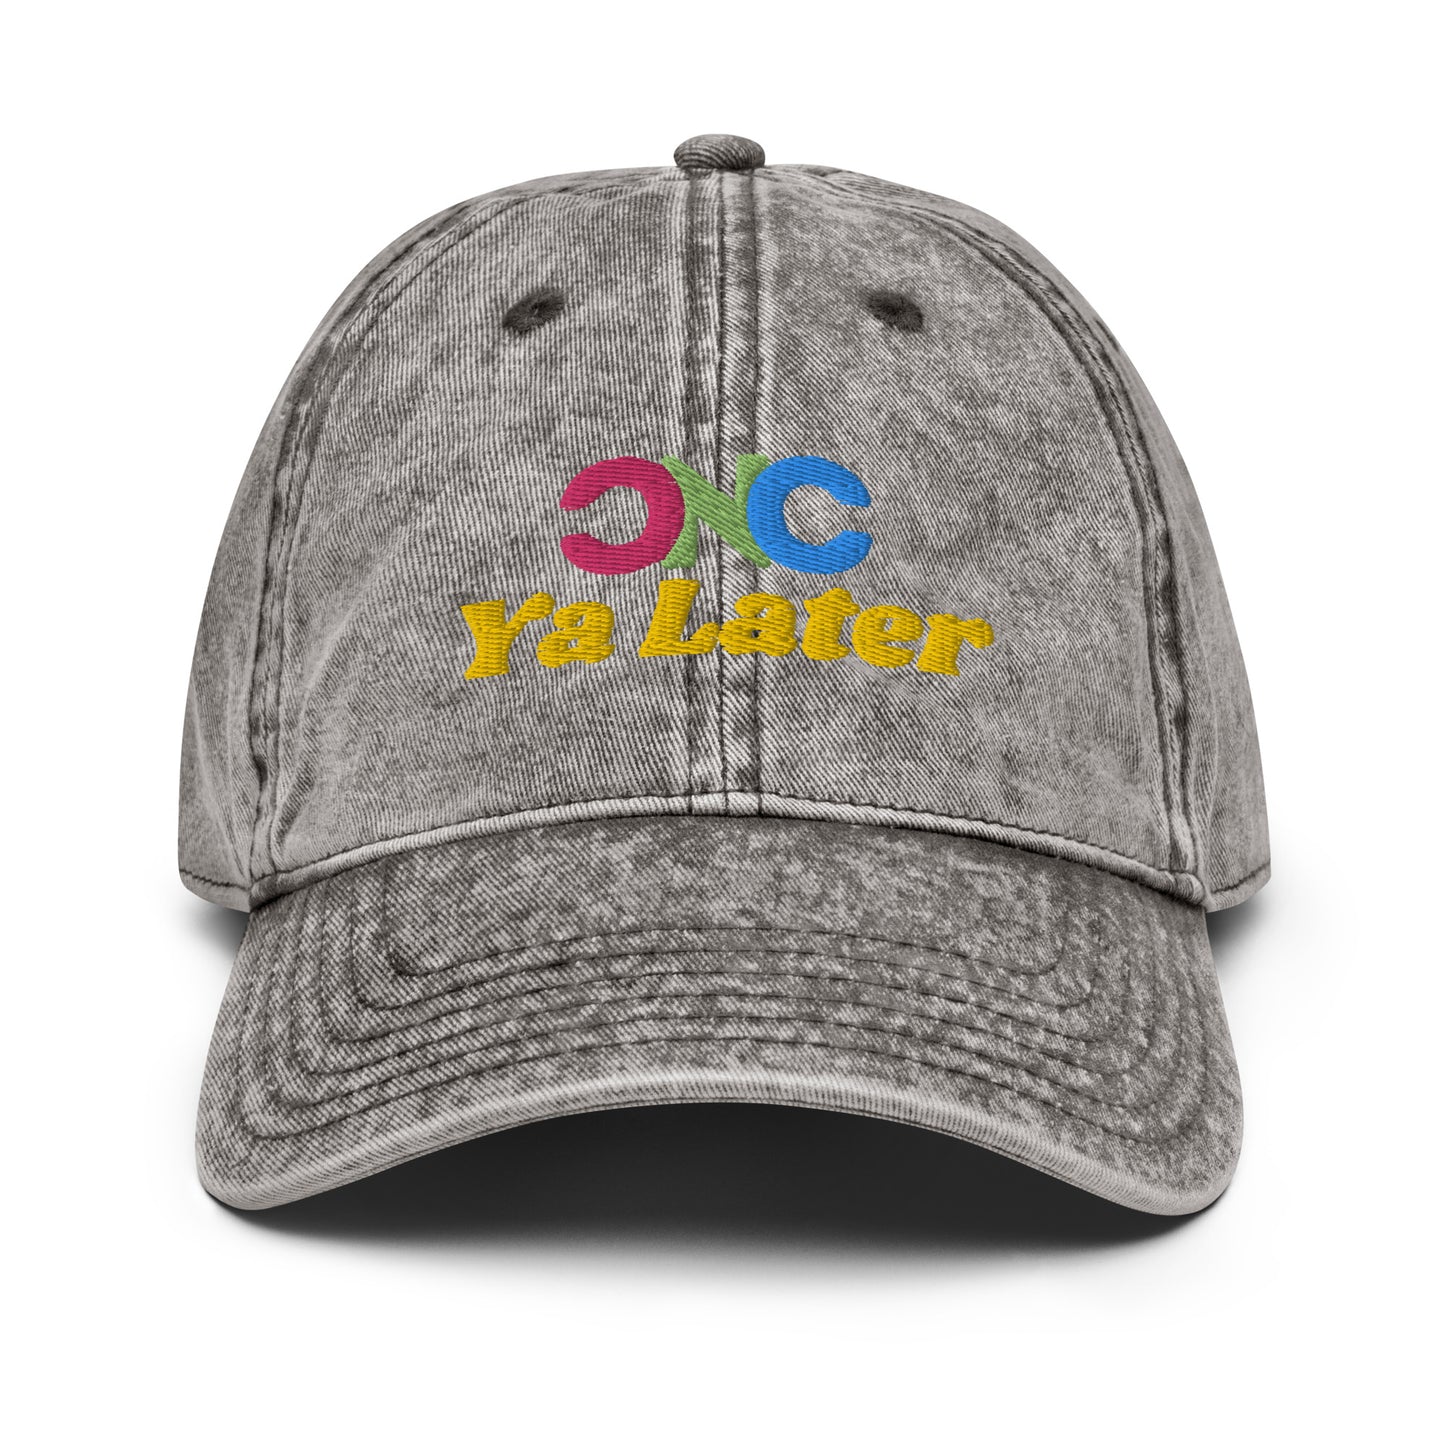 The CNC Ya Later Dad Hat